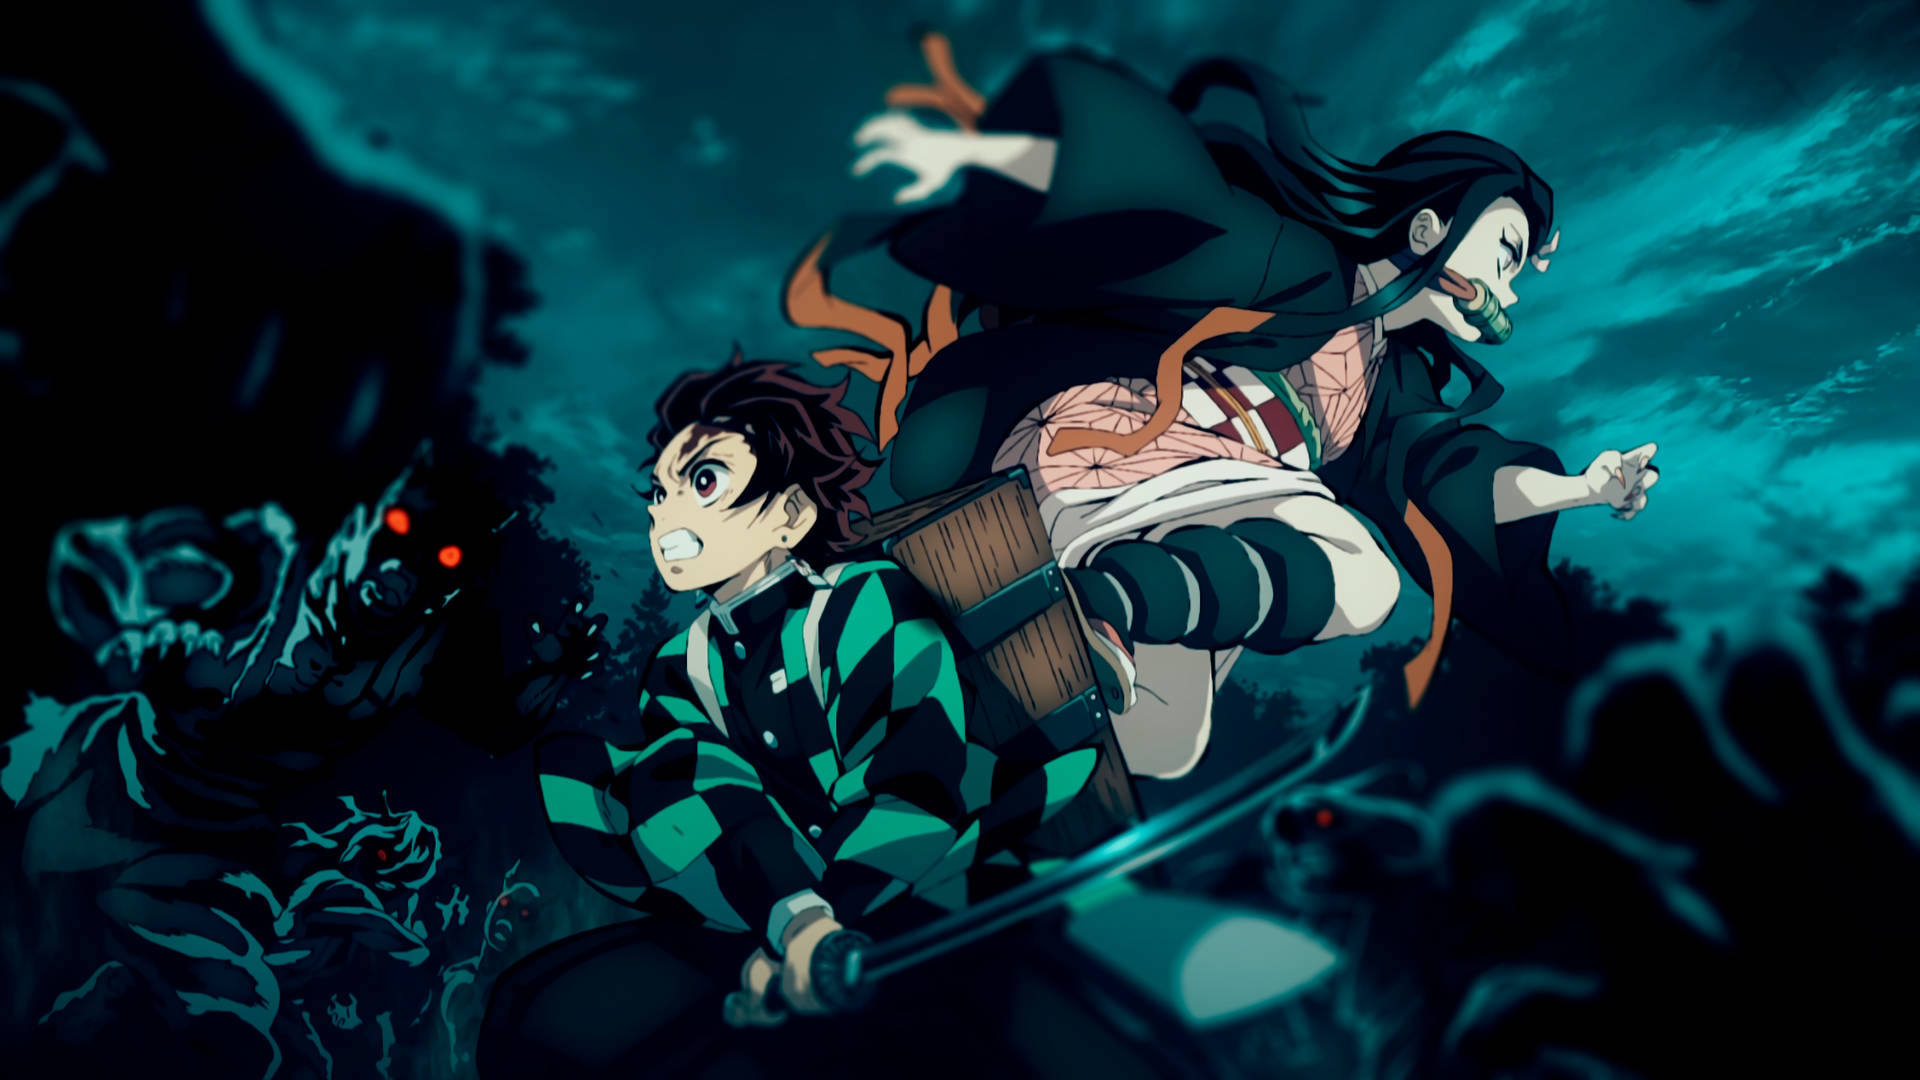 1)  Loving brothers Tanjirou and Nezuko fight together against demons. Wallpaper